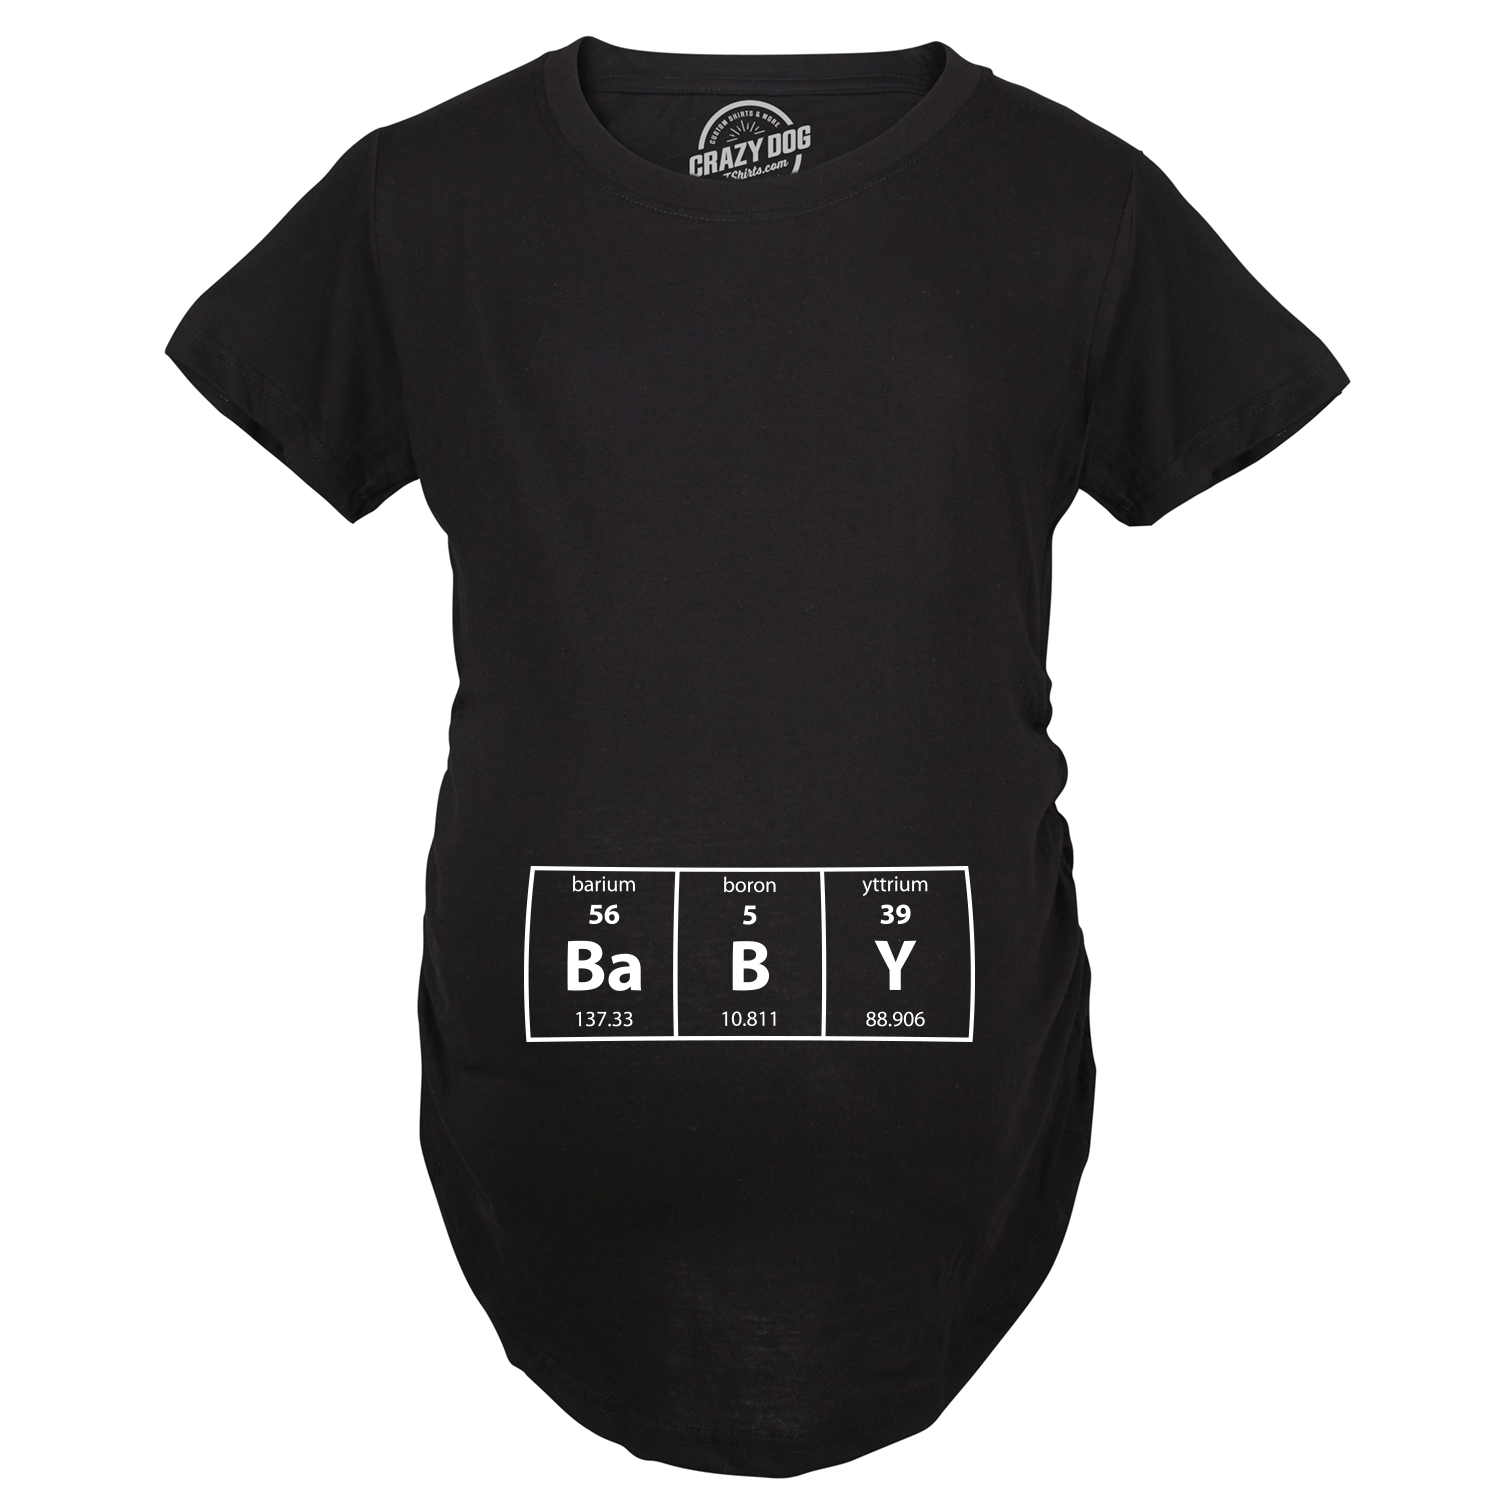 Funny Black Baby Element Maternity T Shirt Nerdy Nerdy Science Tee